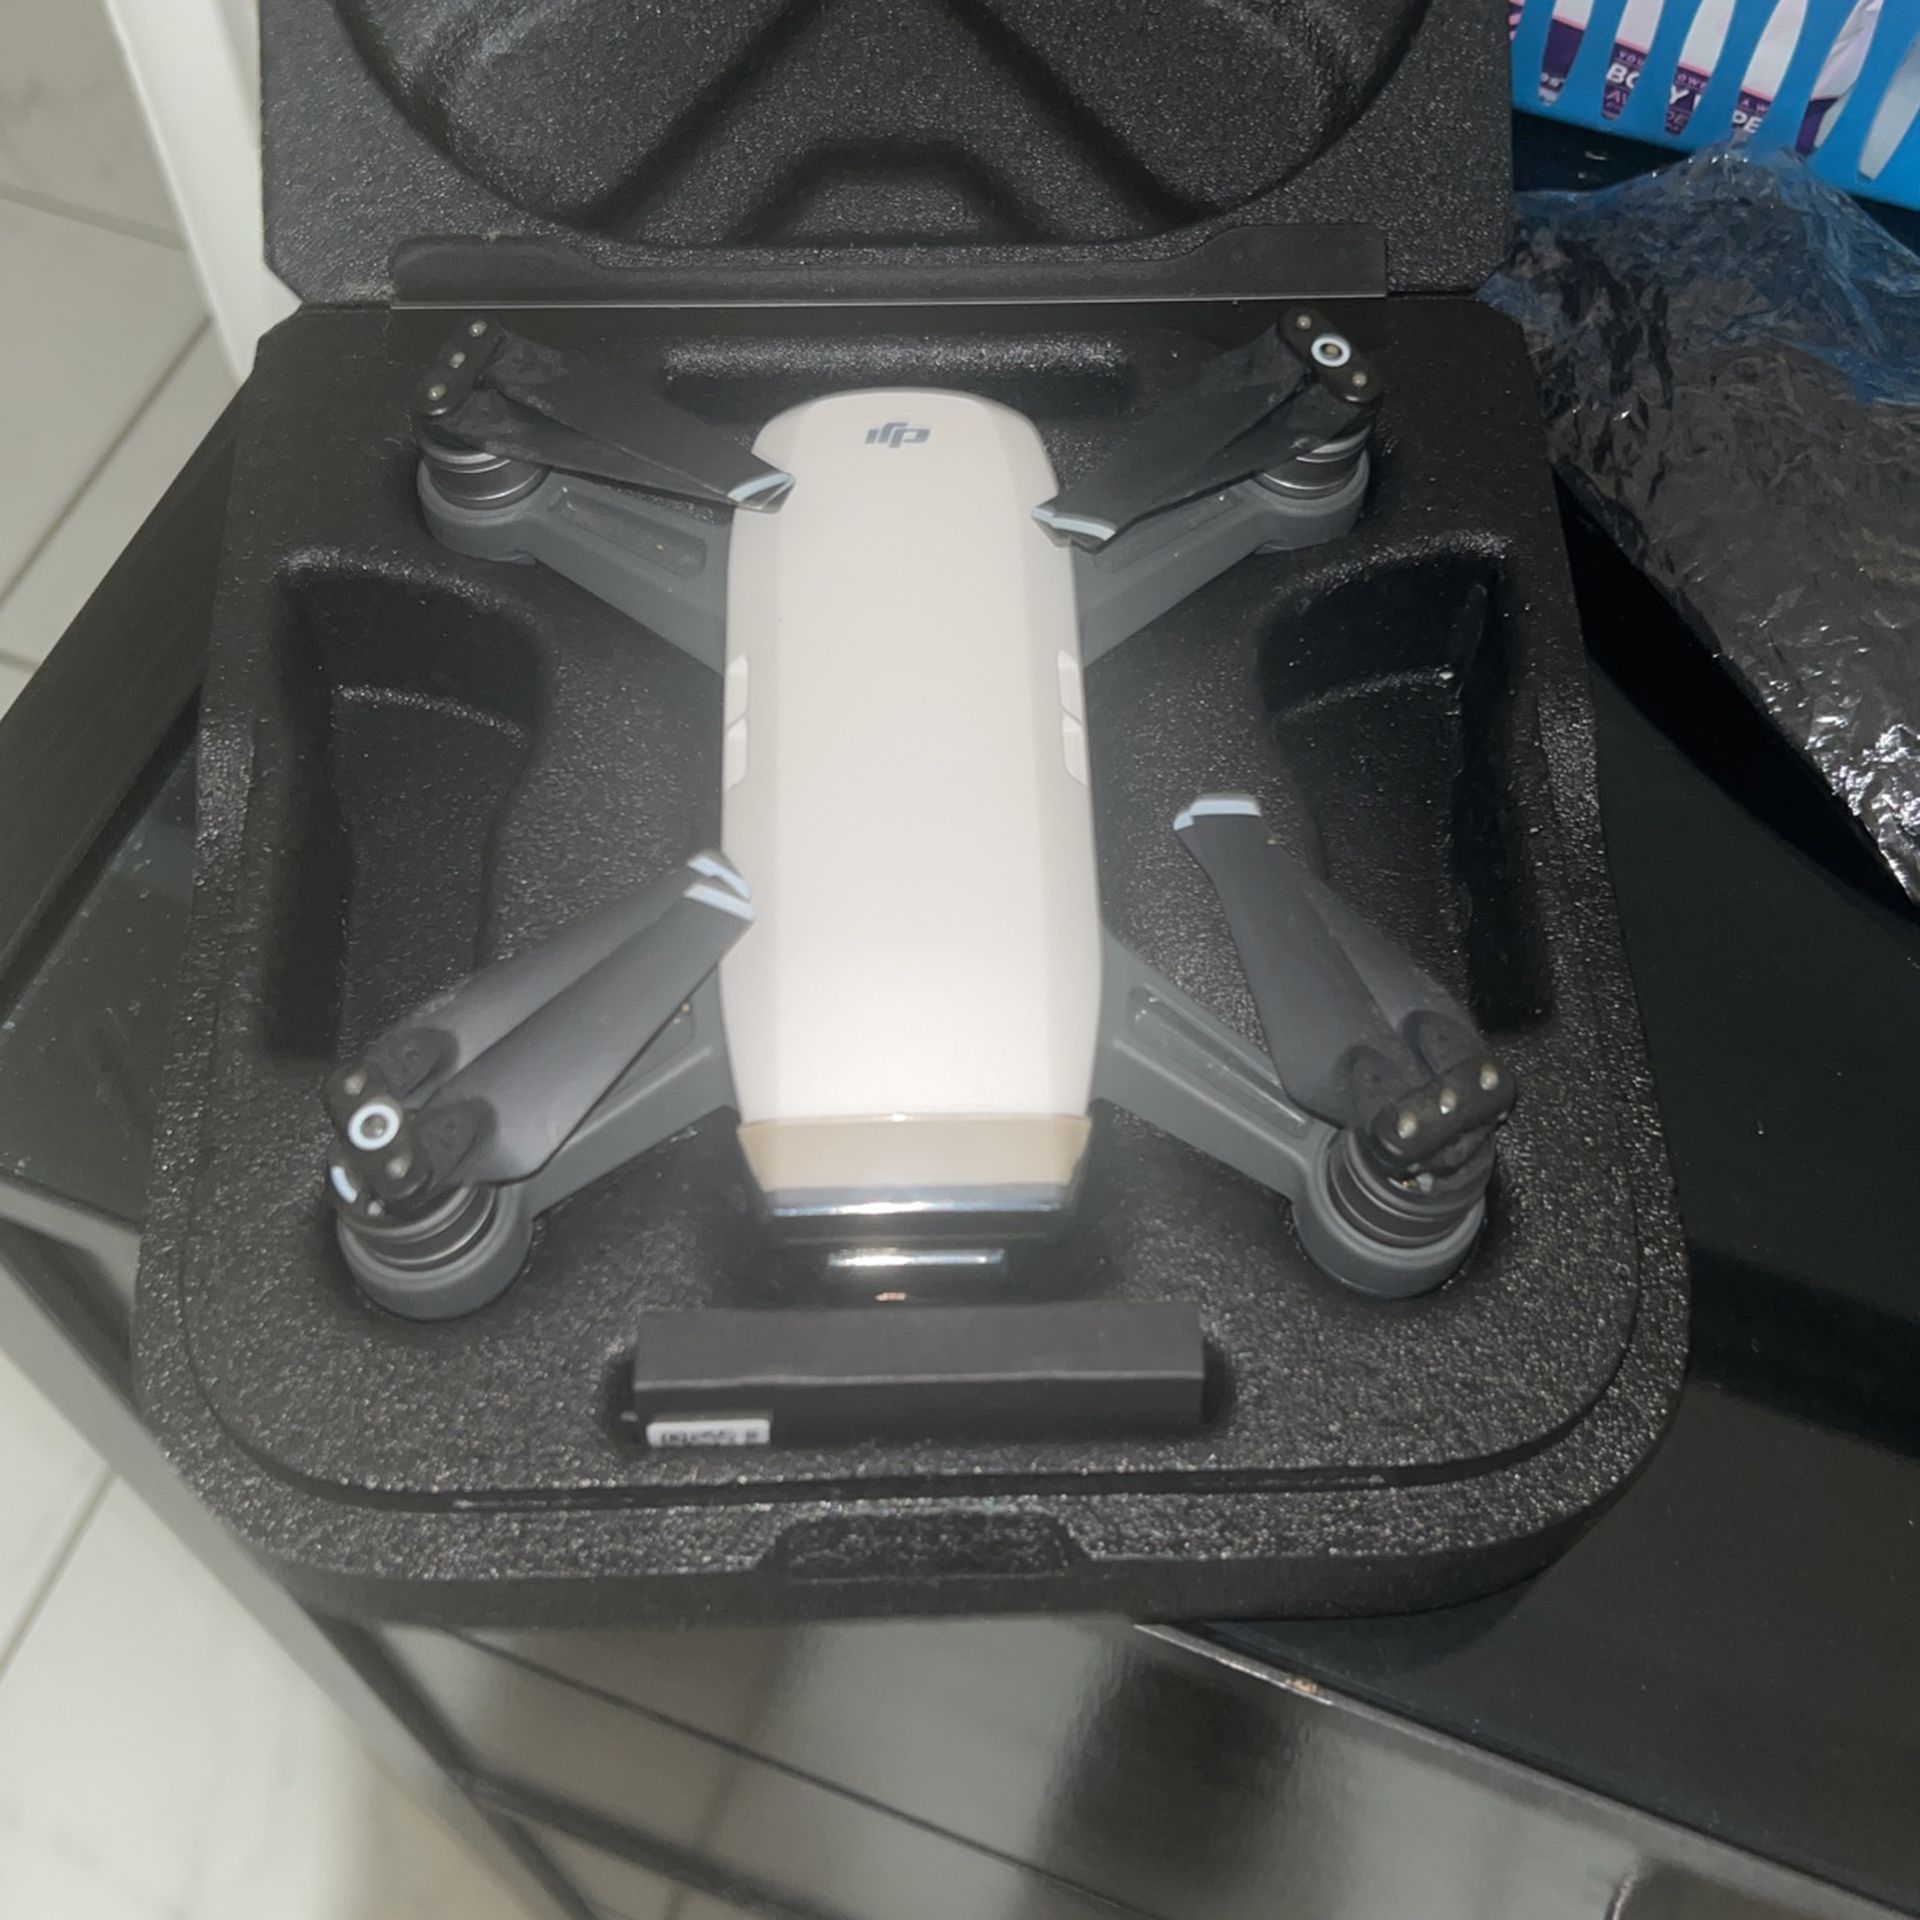 dji Spark Drone and controller 